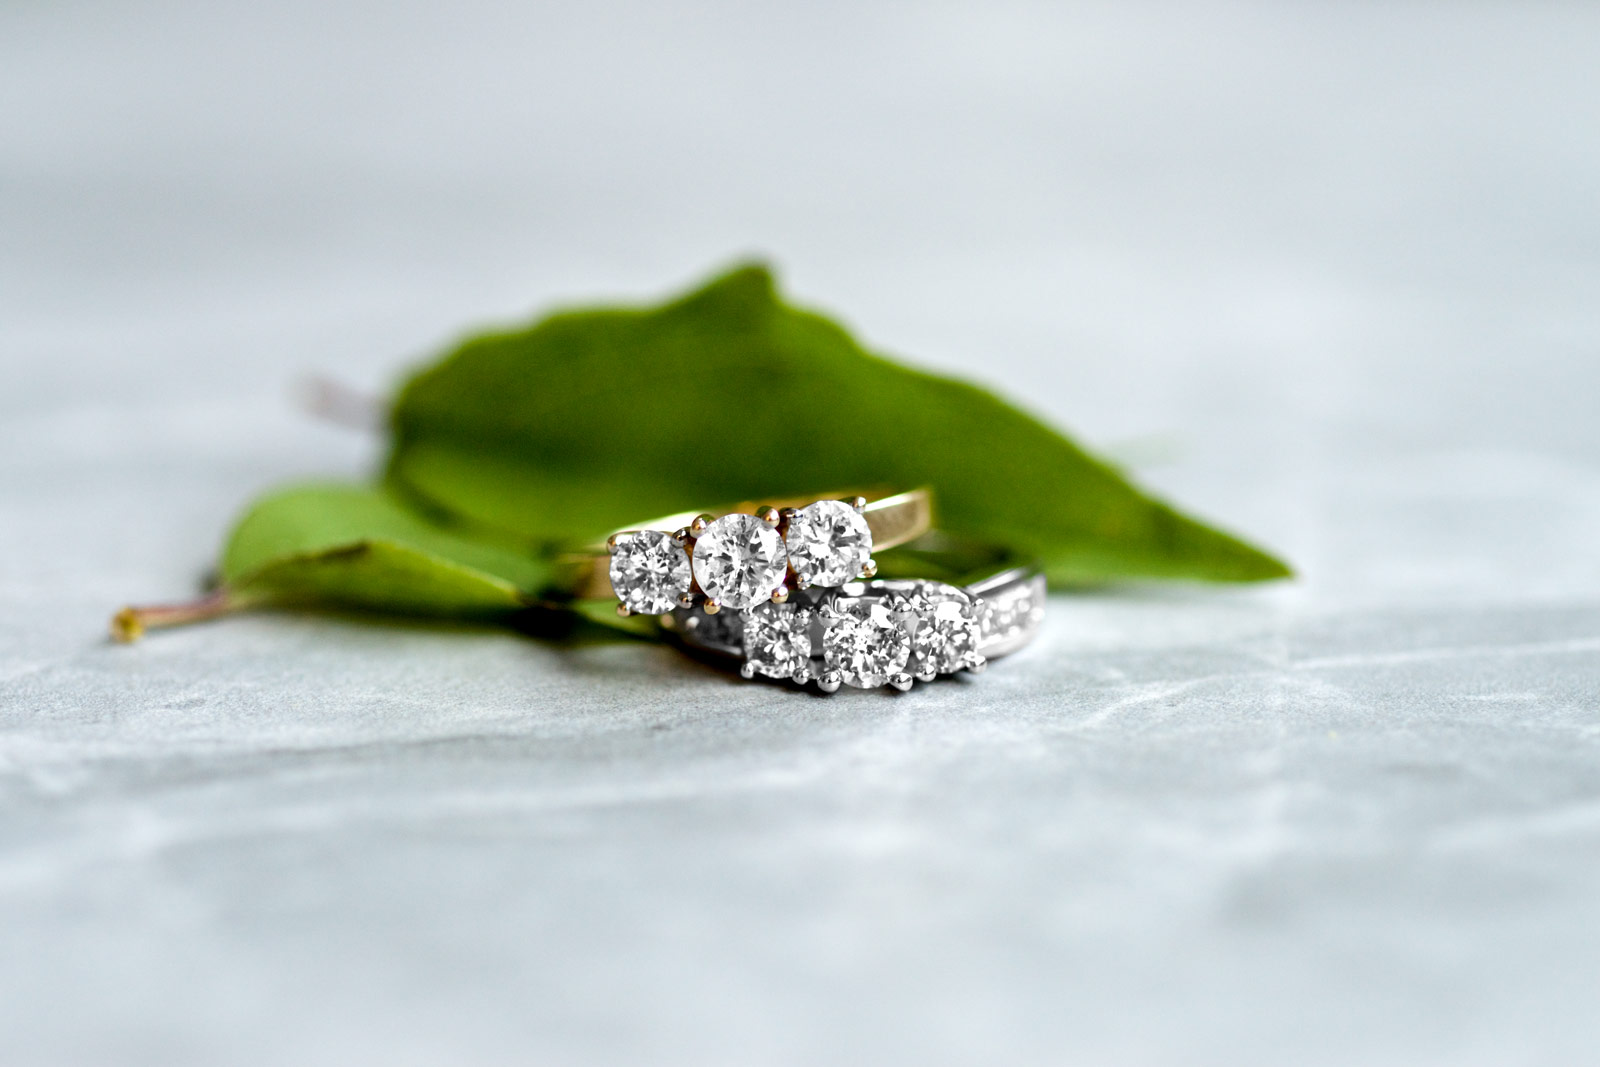 Engagement ring photography with green leaf edited